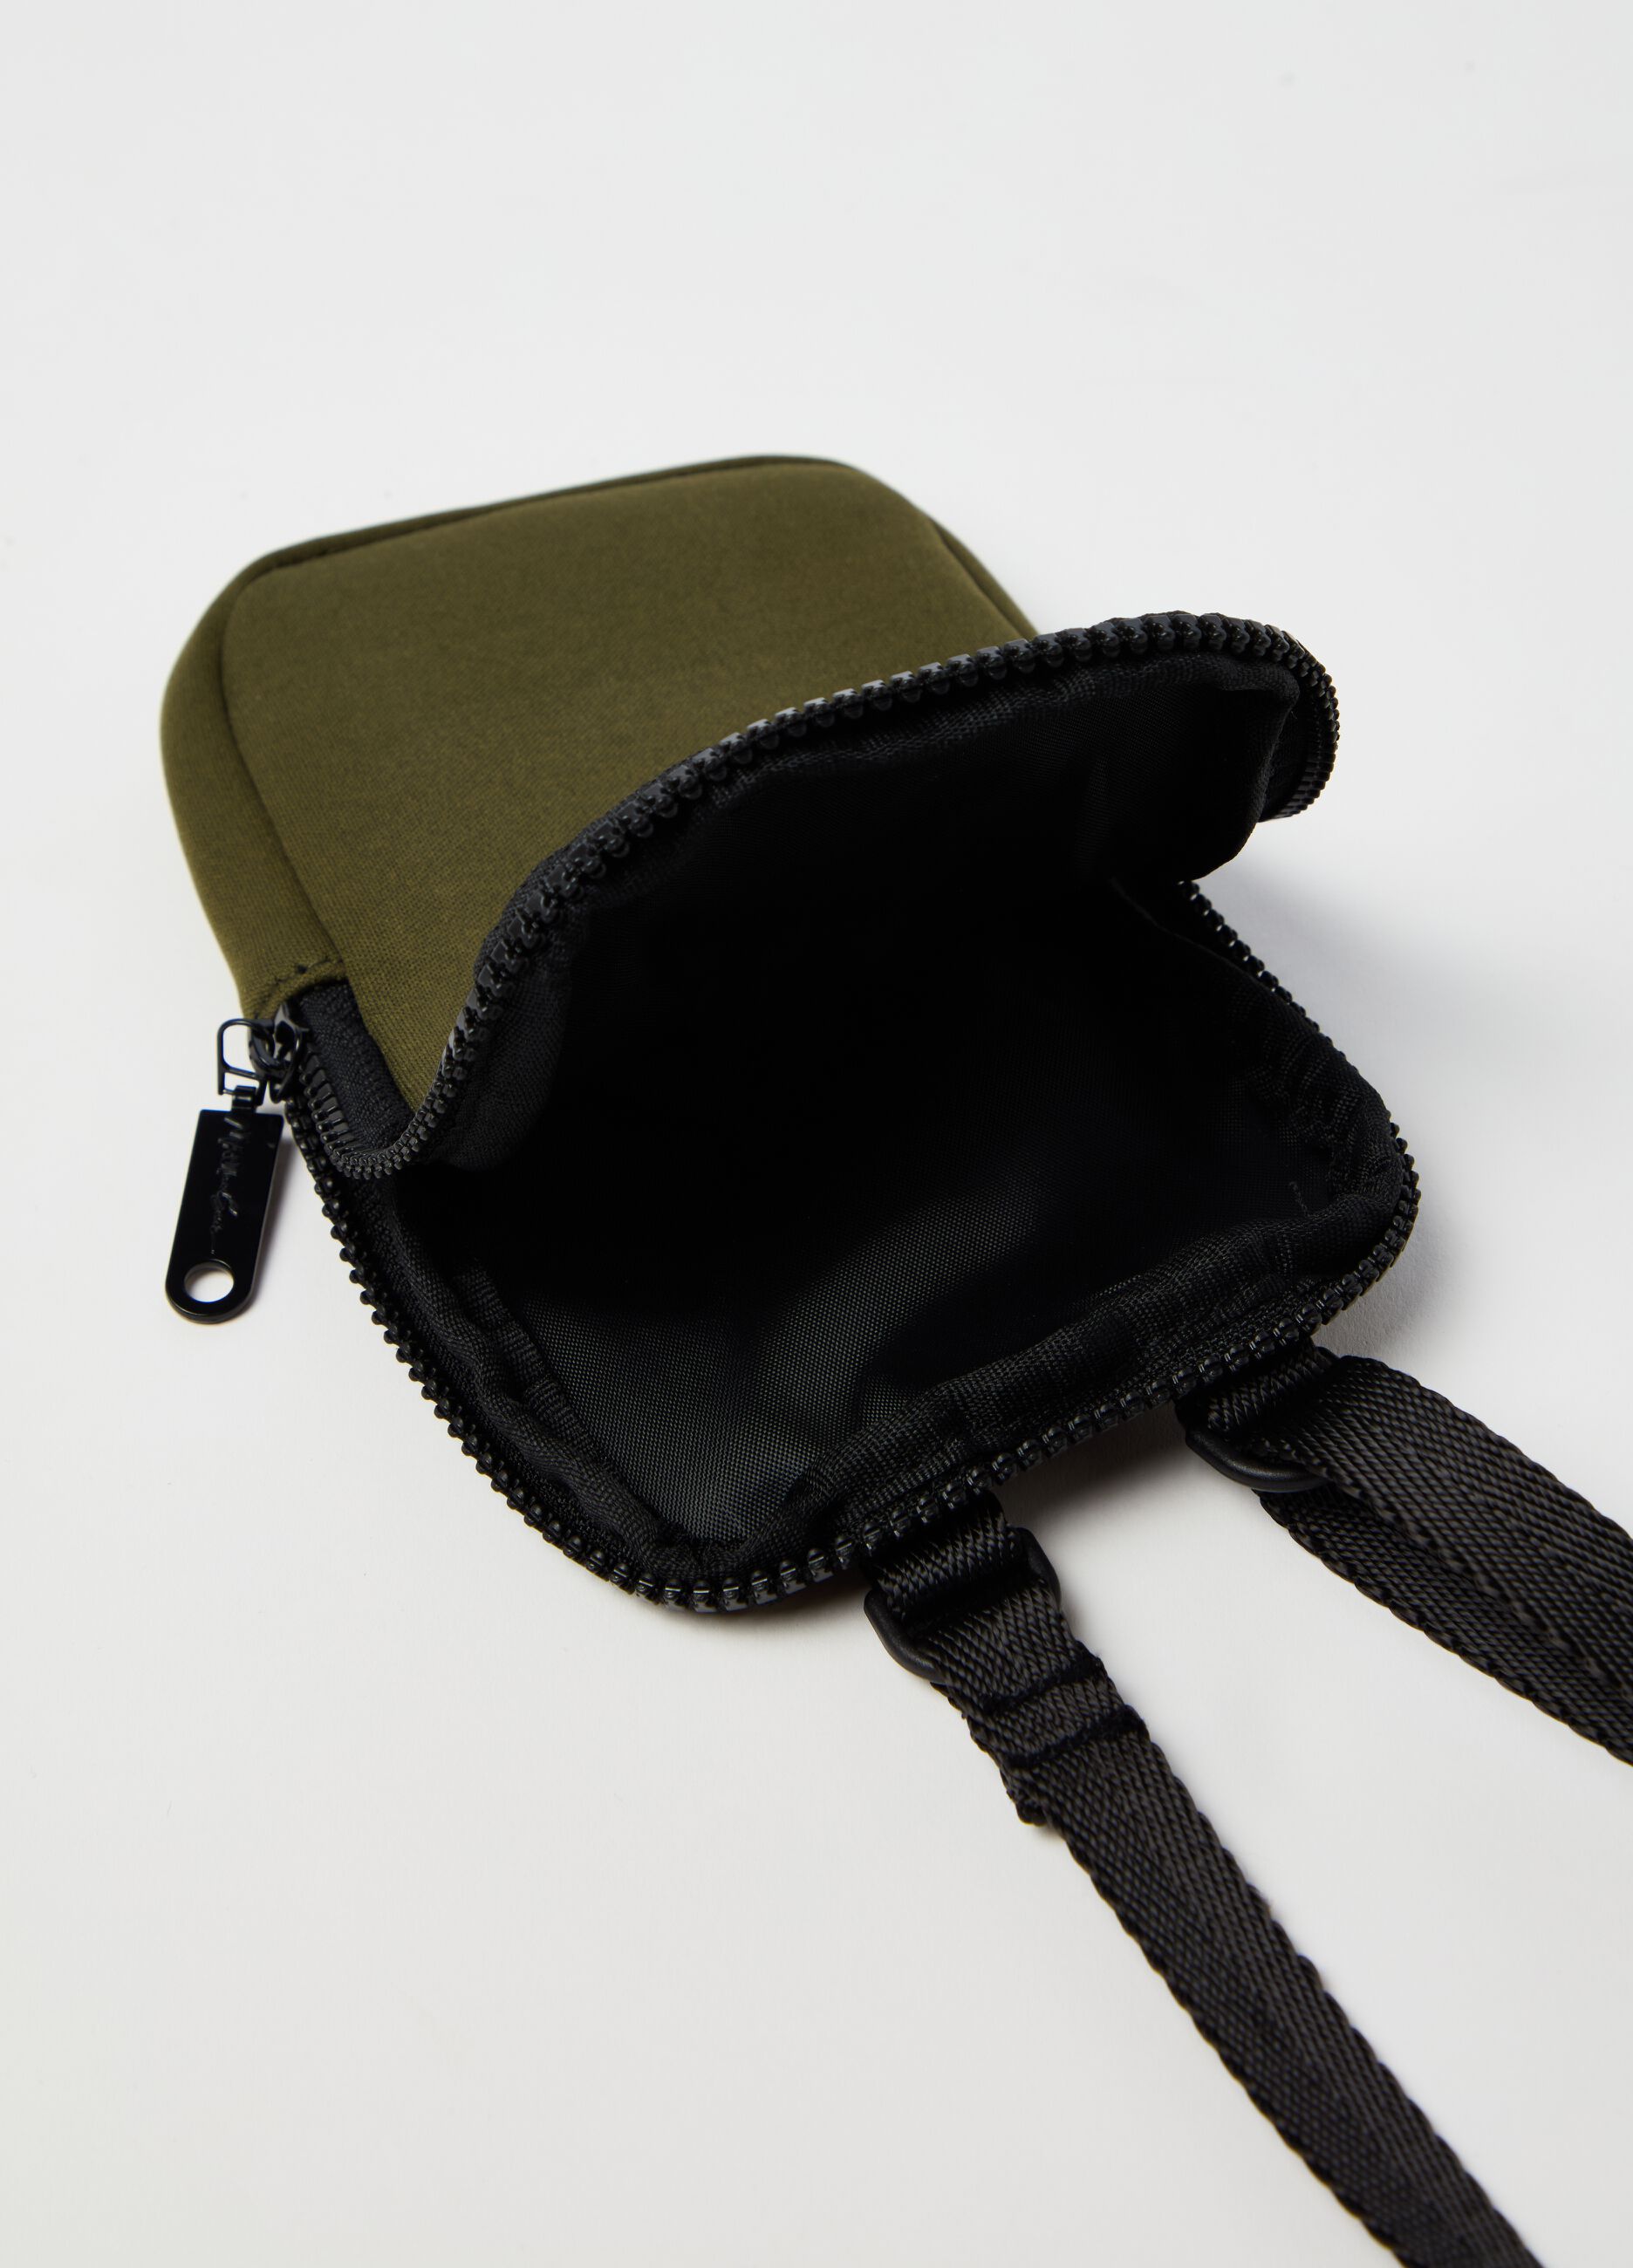 Mobile phone holder with logo patch